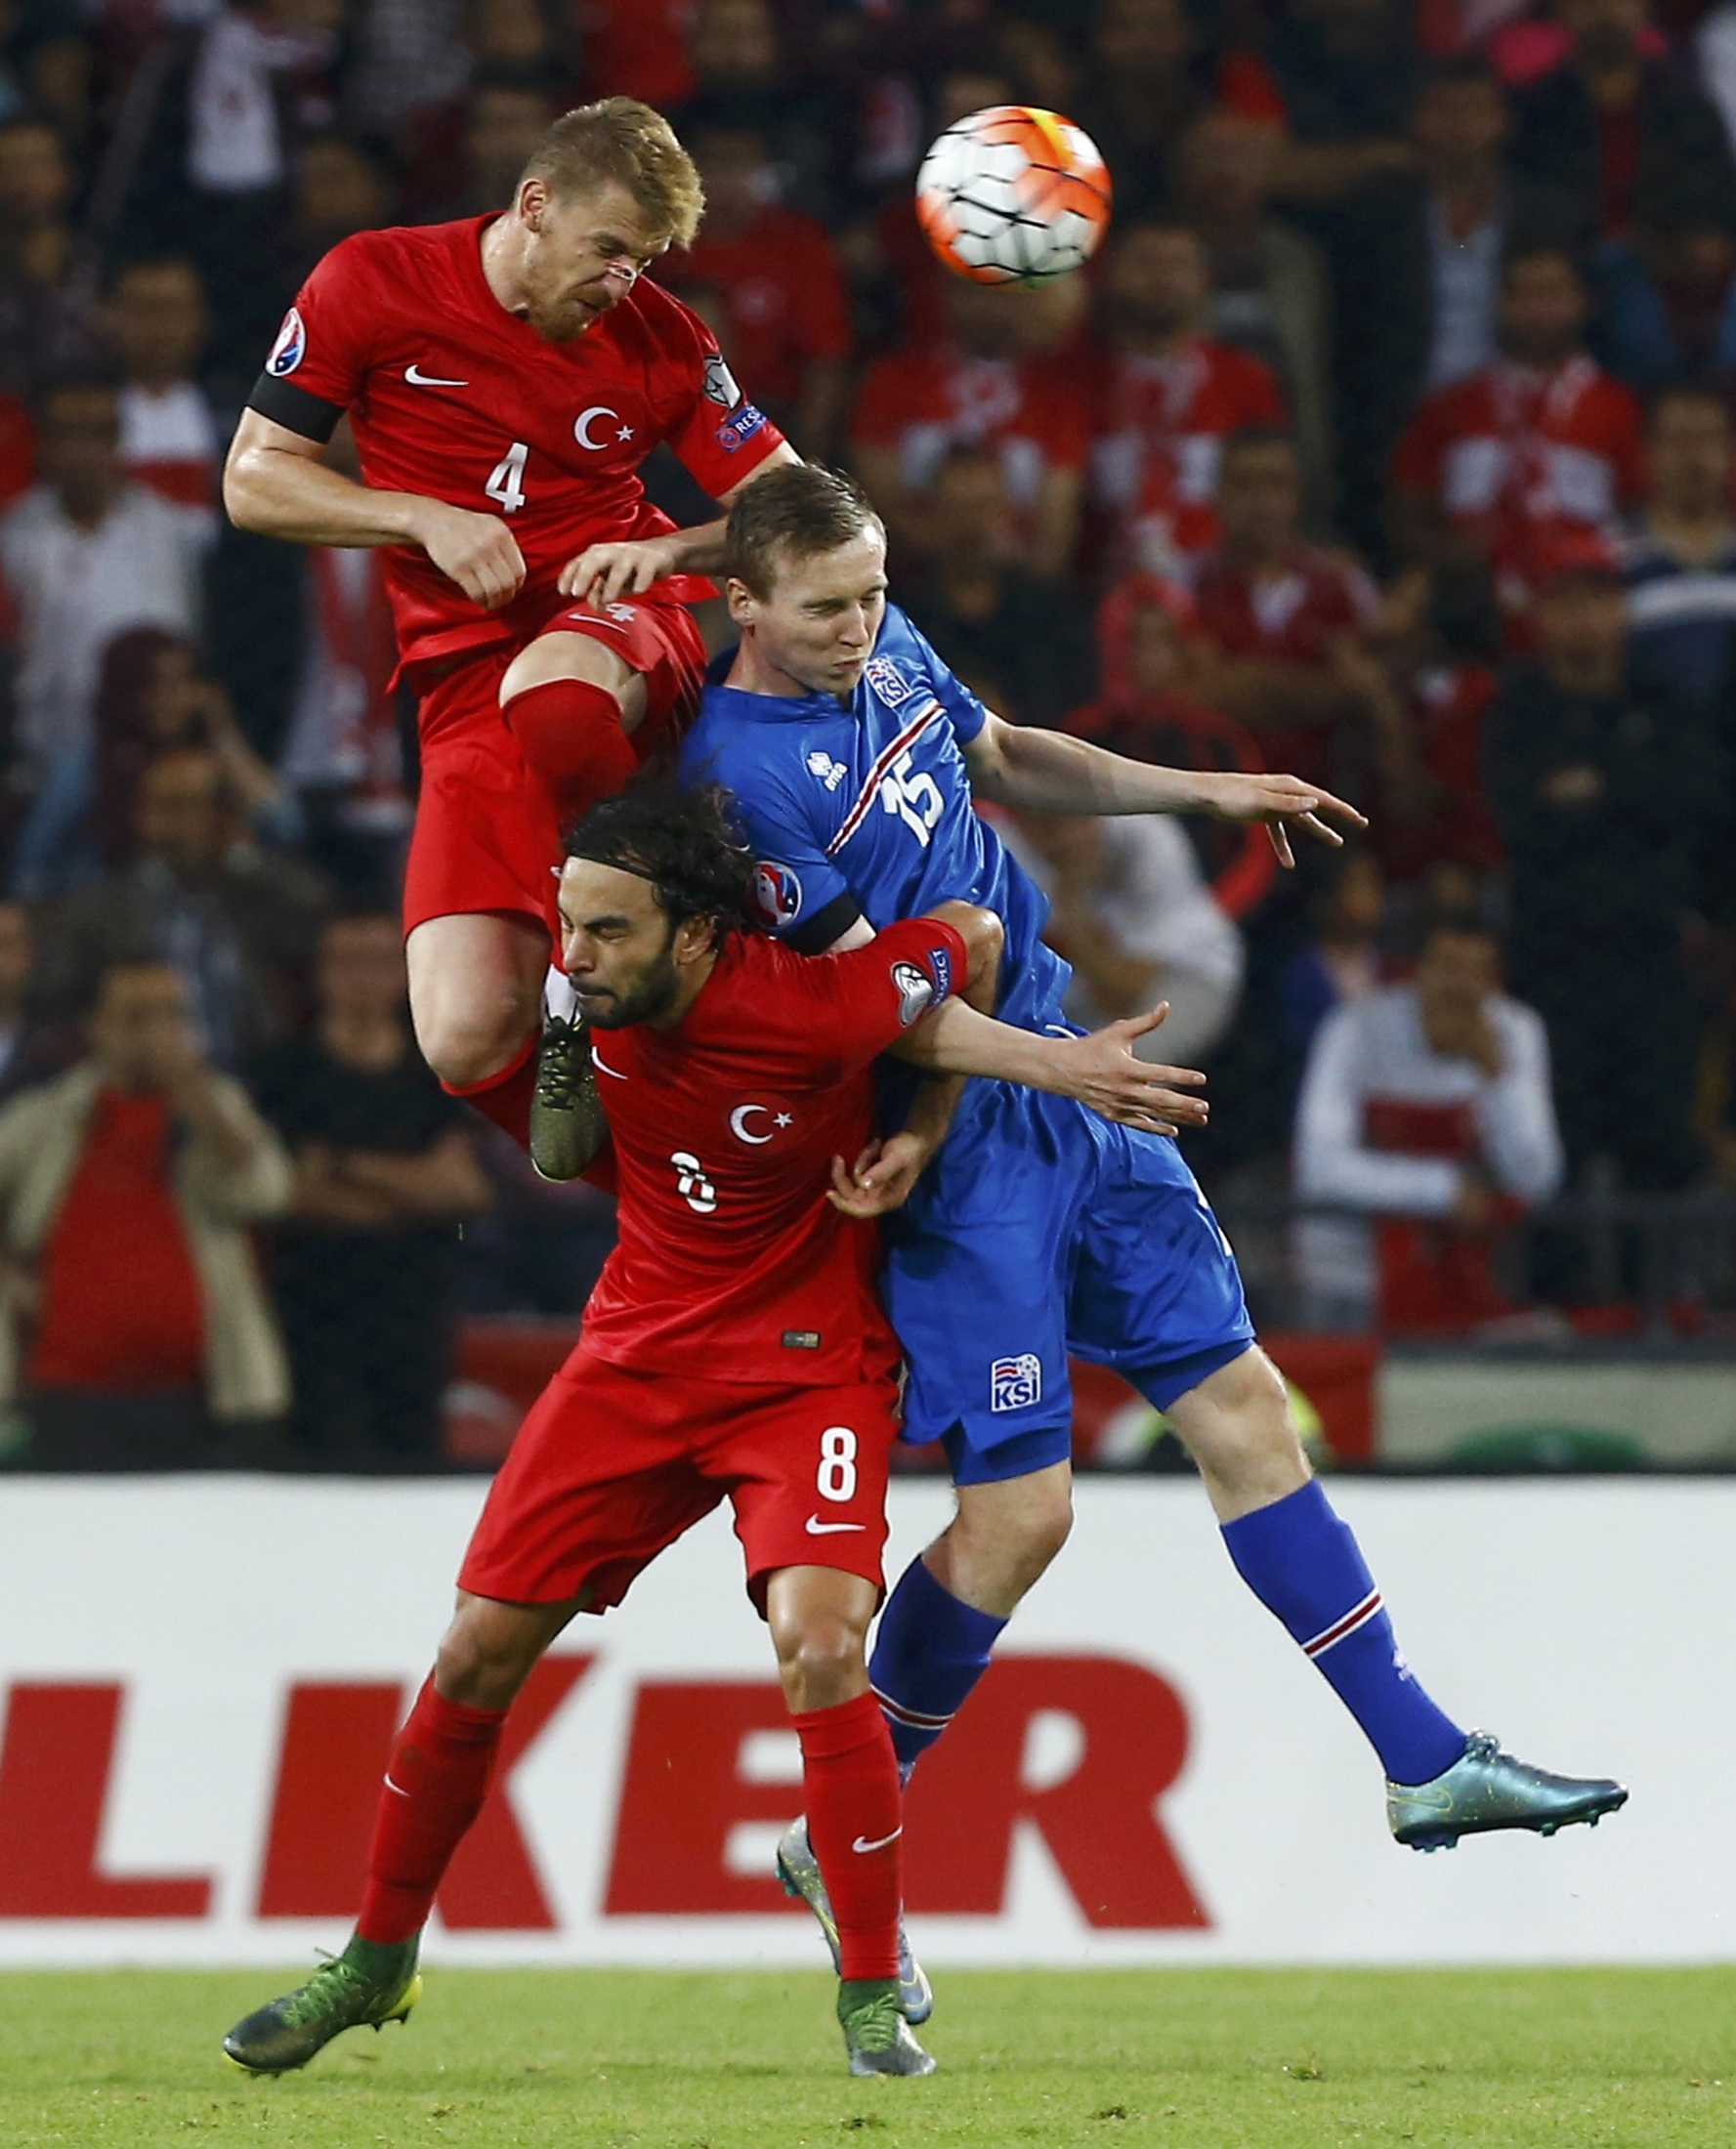 &lt;p&gt;Turkey's Serdar Aziz (L) heads the ball against Iceland's Jon Daoi Bodvarsson (R) and team mate Selcuk Inan during their Euro 2016 Group A qualification soccer match in Konya, Turkey, October 13, 2015. REUTERS/Umit Bektas&lt;/p&gt;